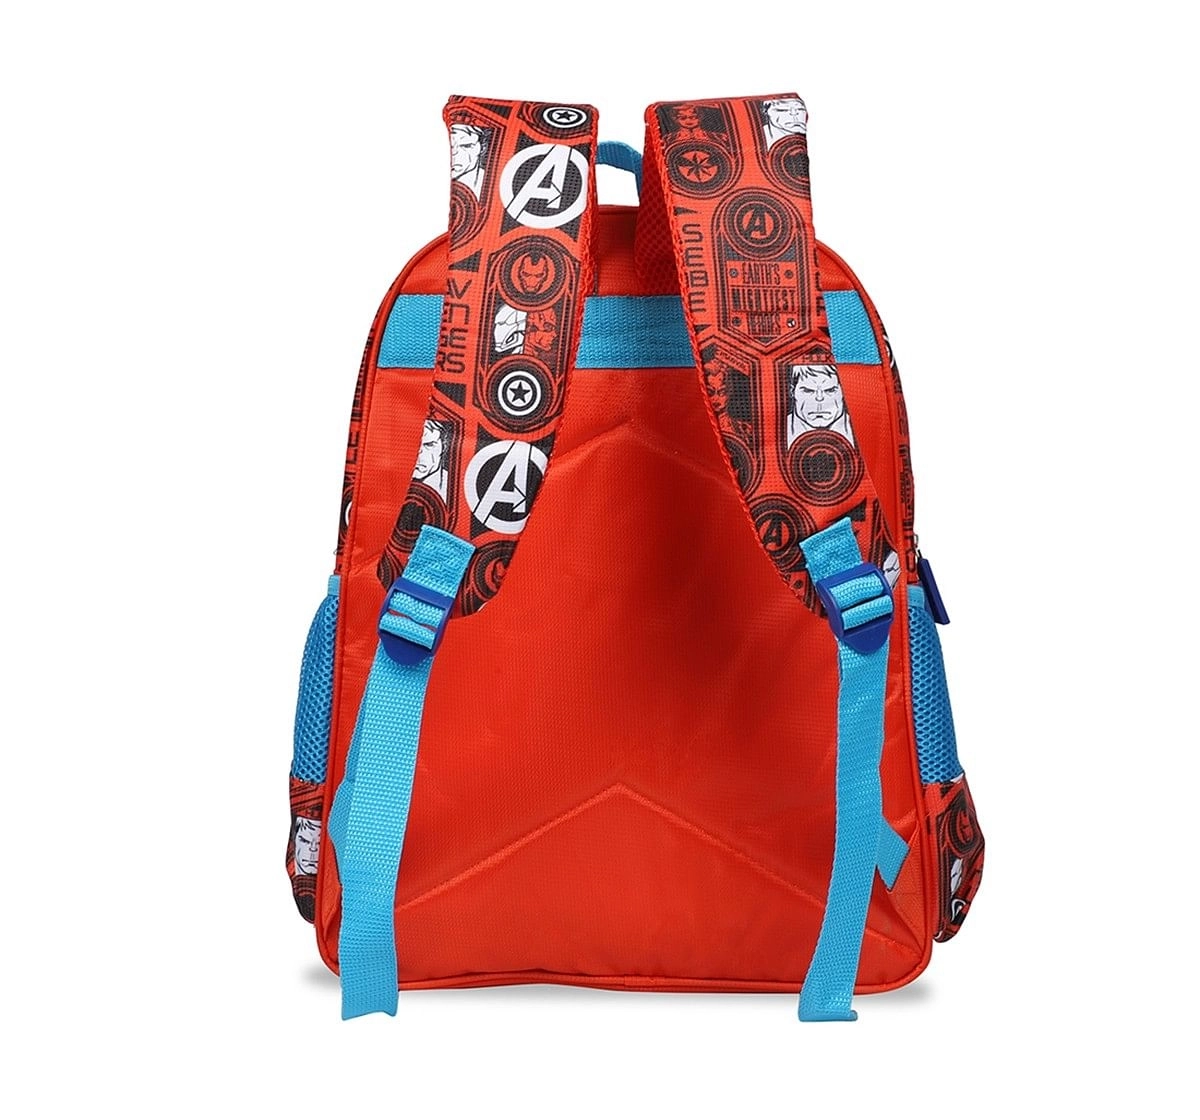 Marvel Avengers Super Heroes Red & Blue School Bag 41 Cm Bags for age 7Y+ 